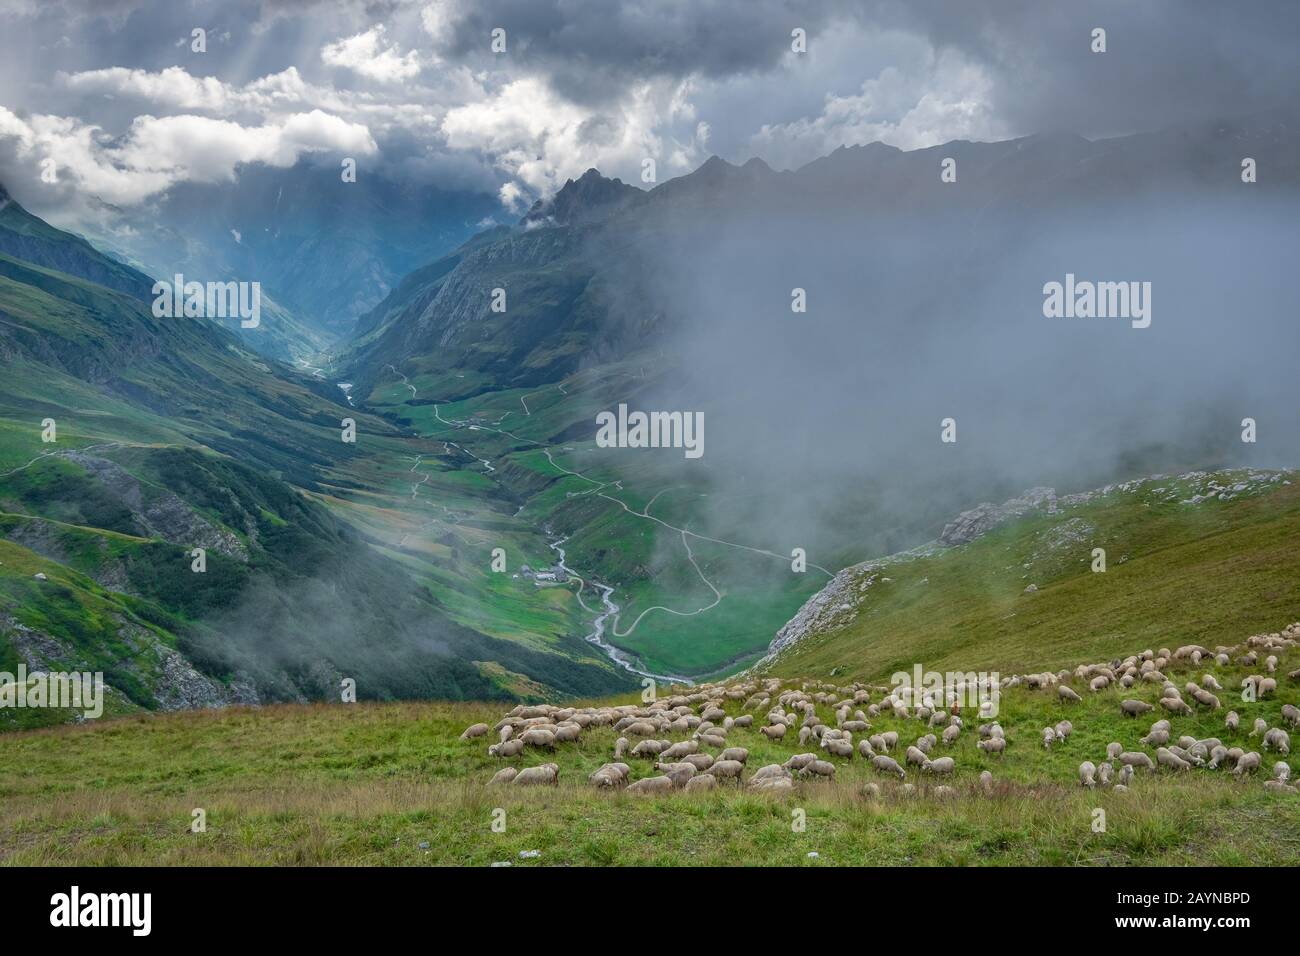 Sheep grazing on the hillside with a stunning view looking down a valley surrounded by mountains in the French Alps on the Tour Du Mont Blanc trek Stock Photo